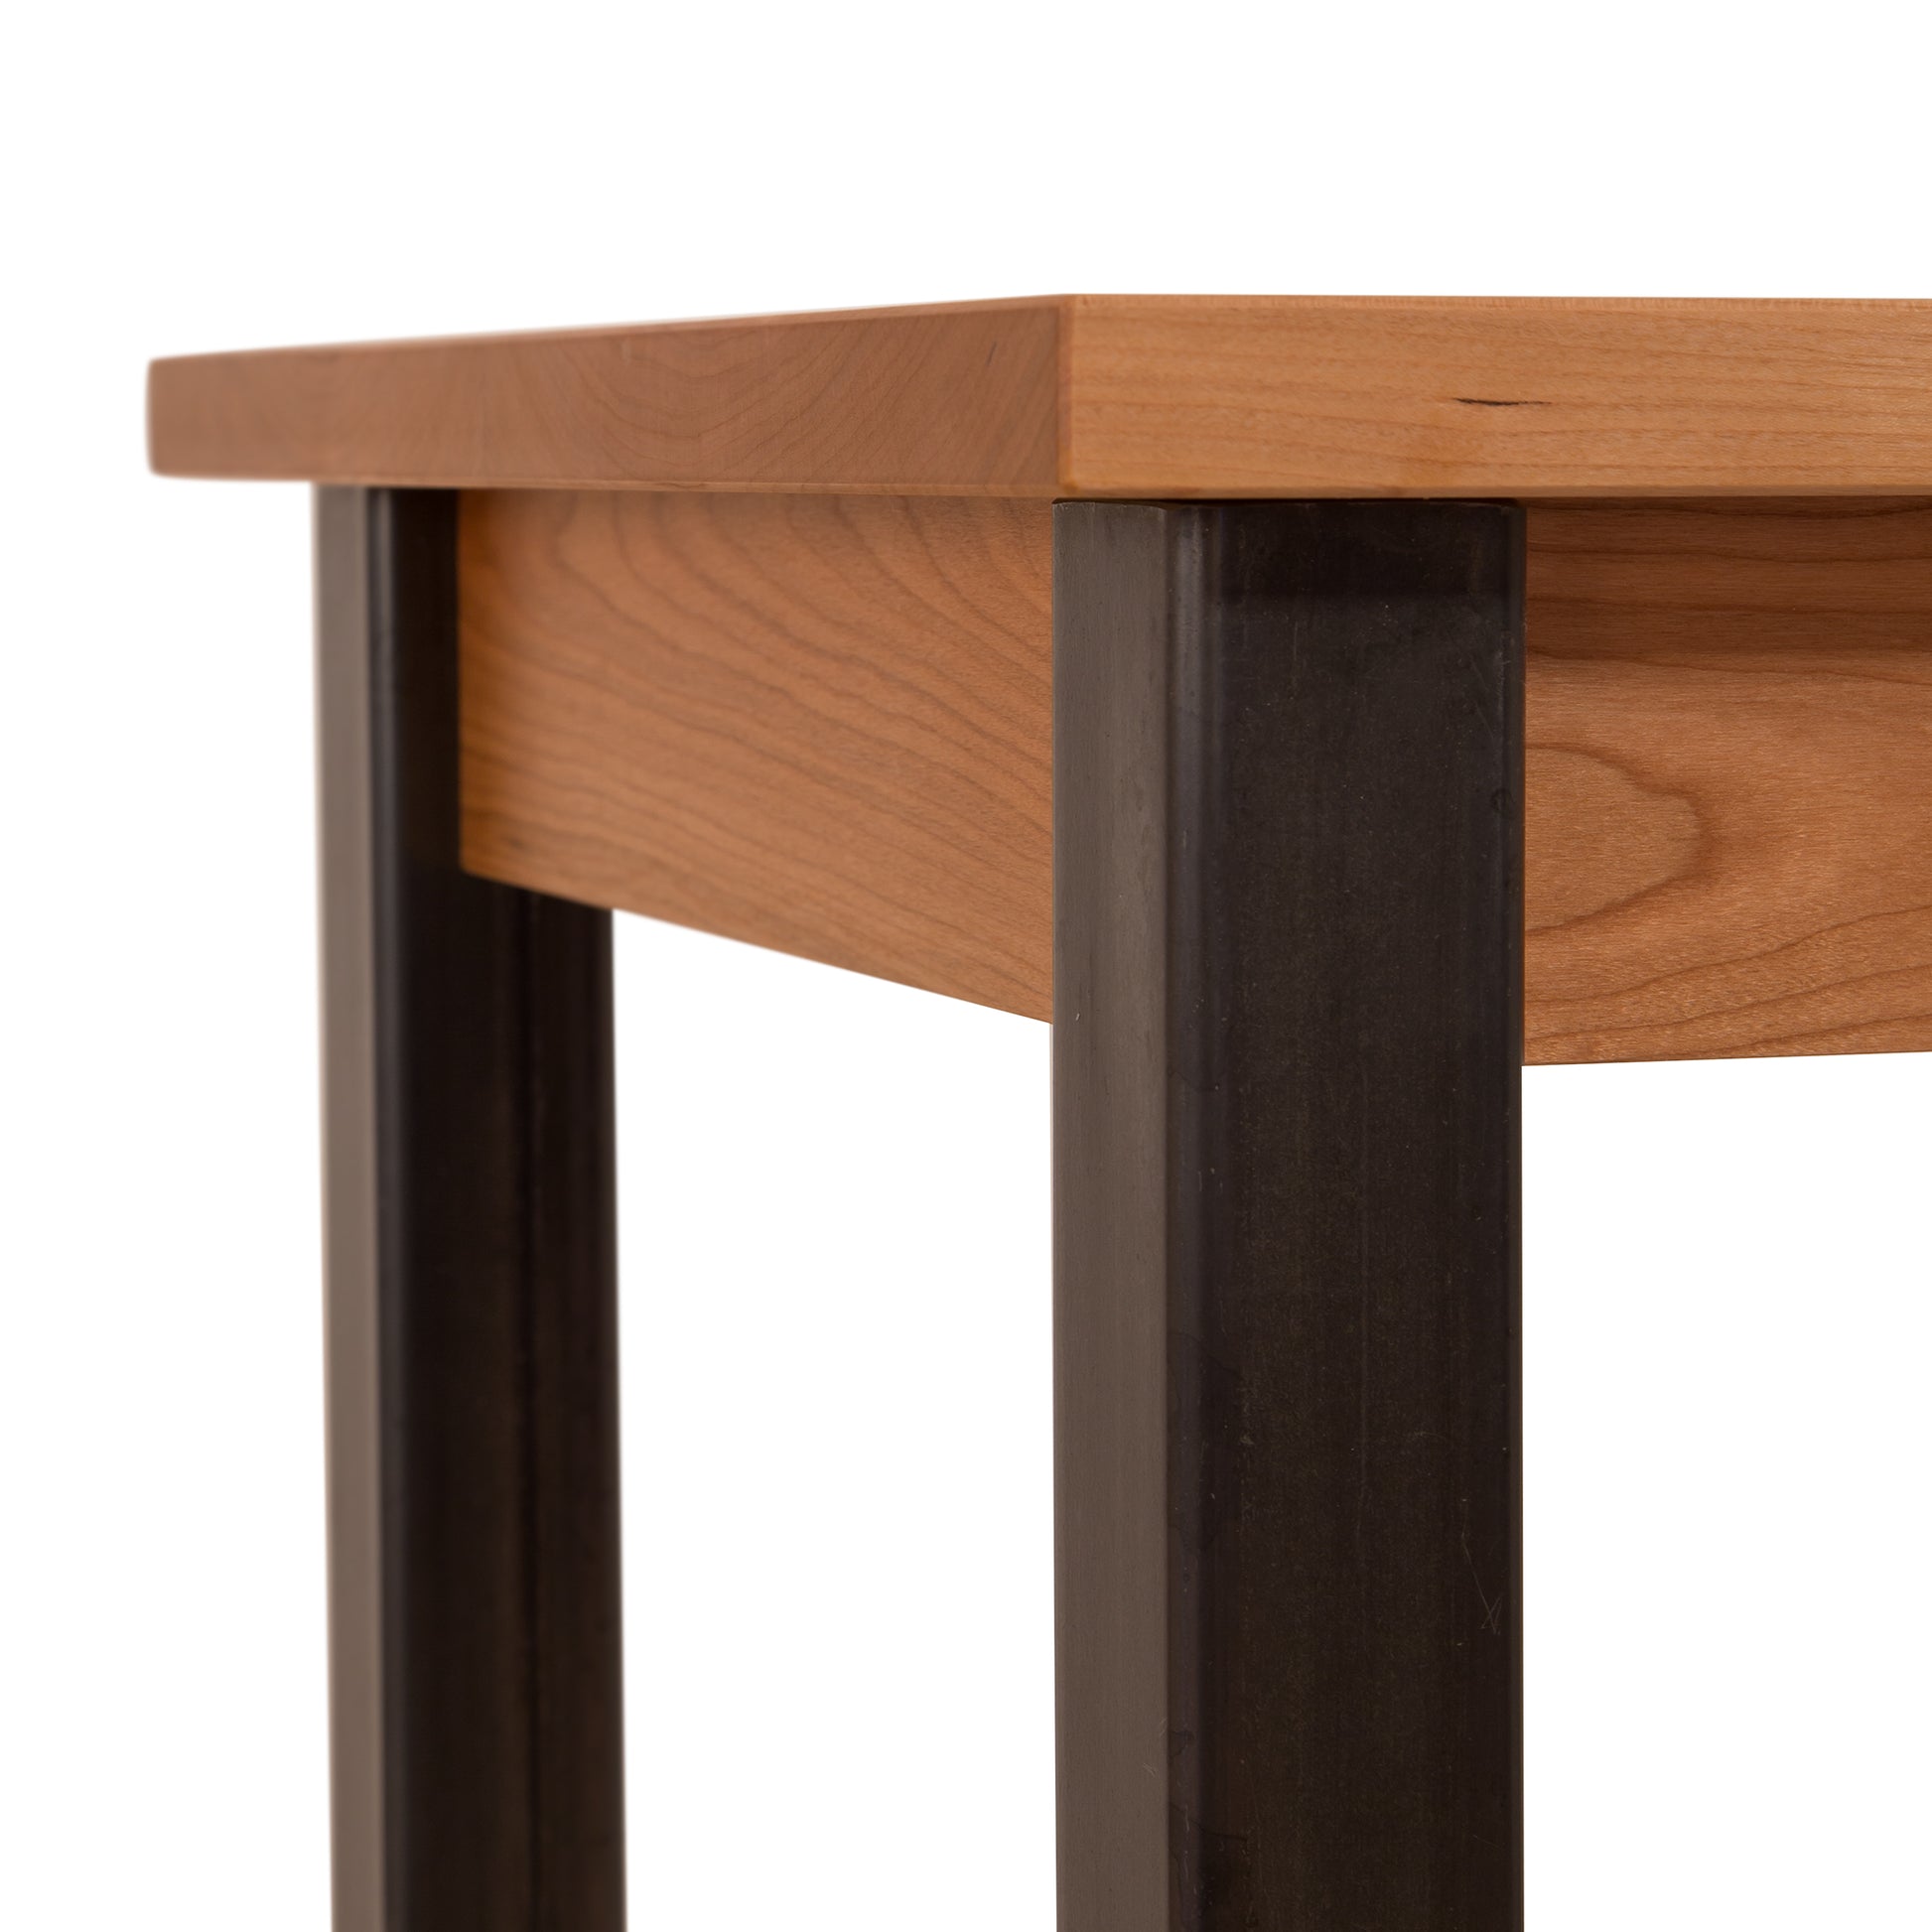 A Lyndon Furniture Contemporary Farmhouse End Table - Clearance with a wooden top and metal legs.